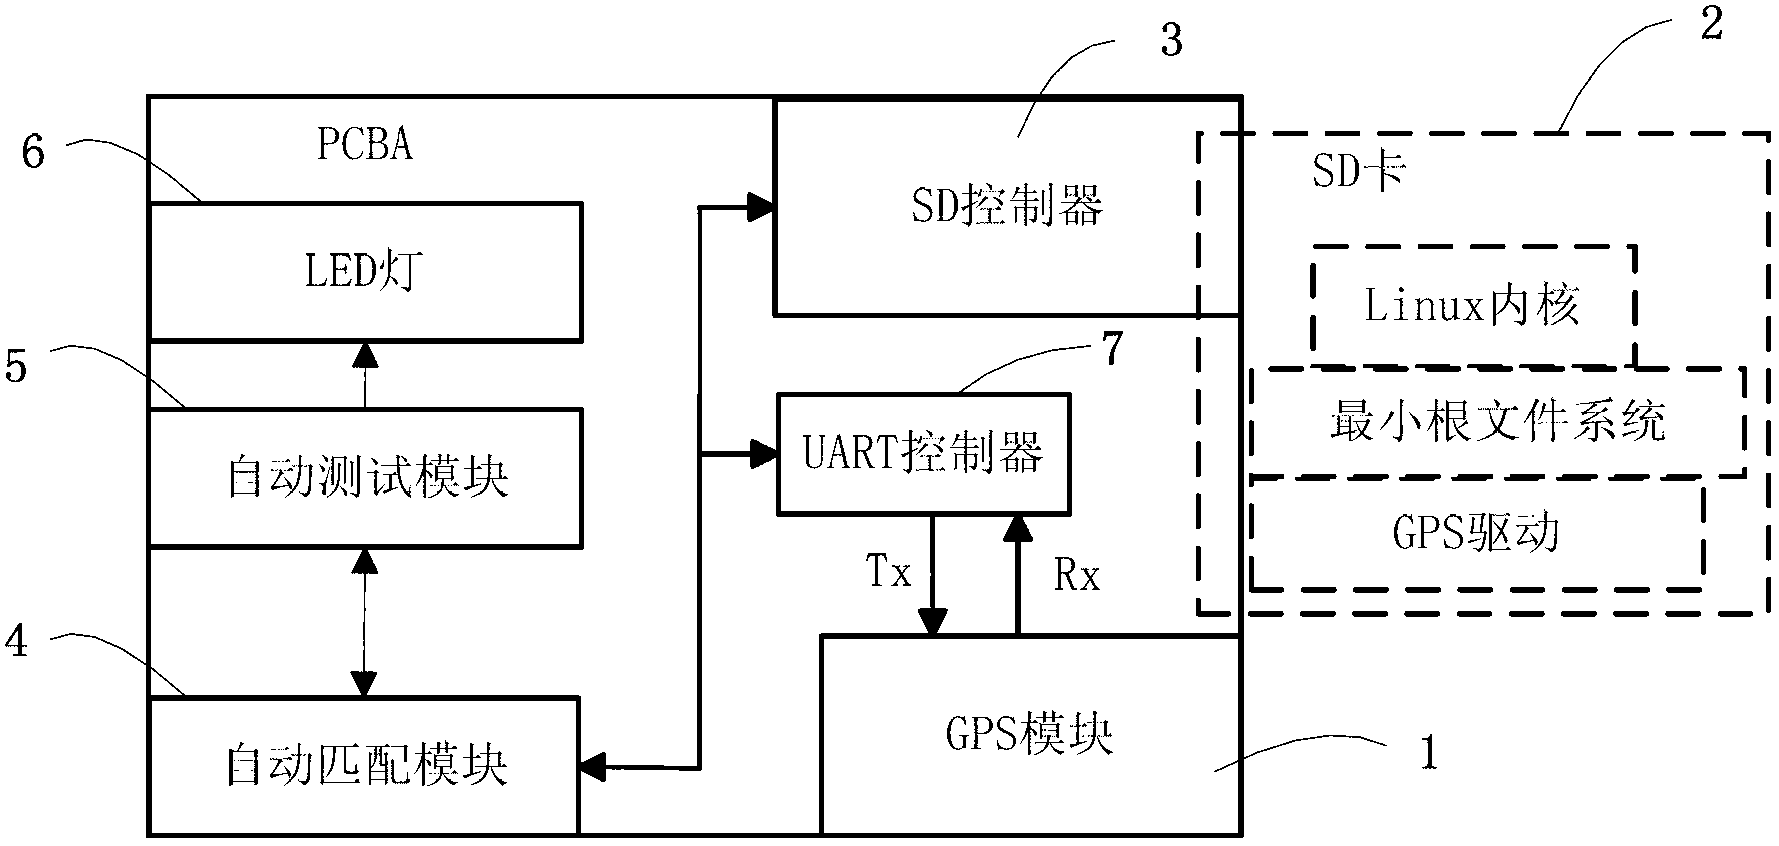 Method and system for testing GPS (global position system) module on embedded PCBA (printed circuit board assembly)